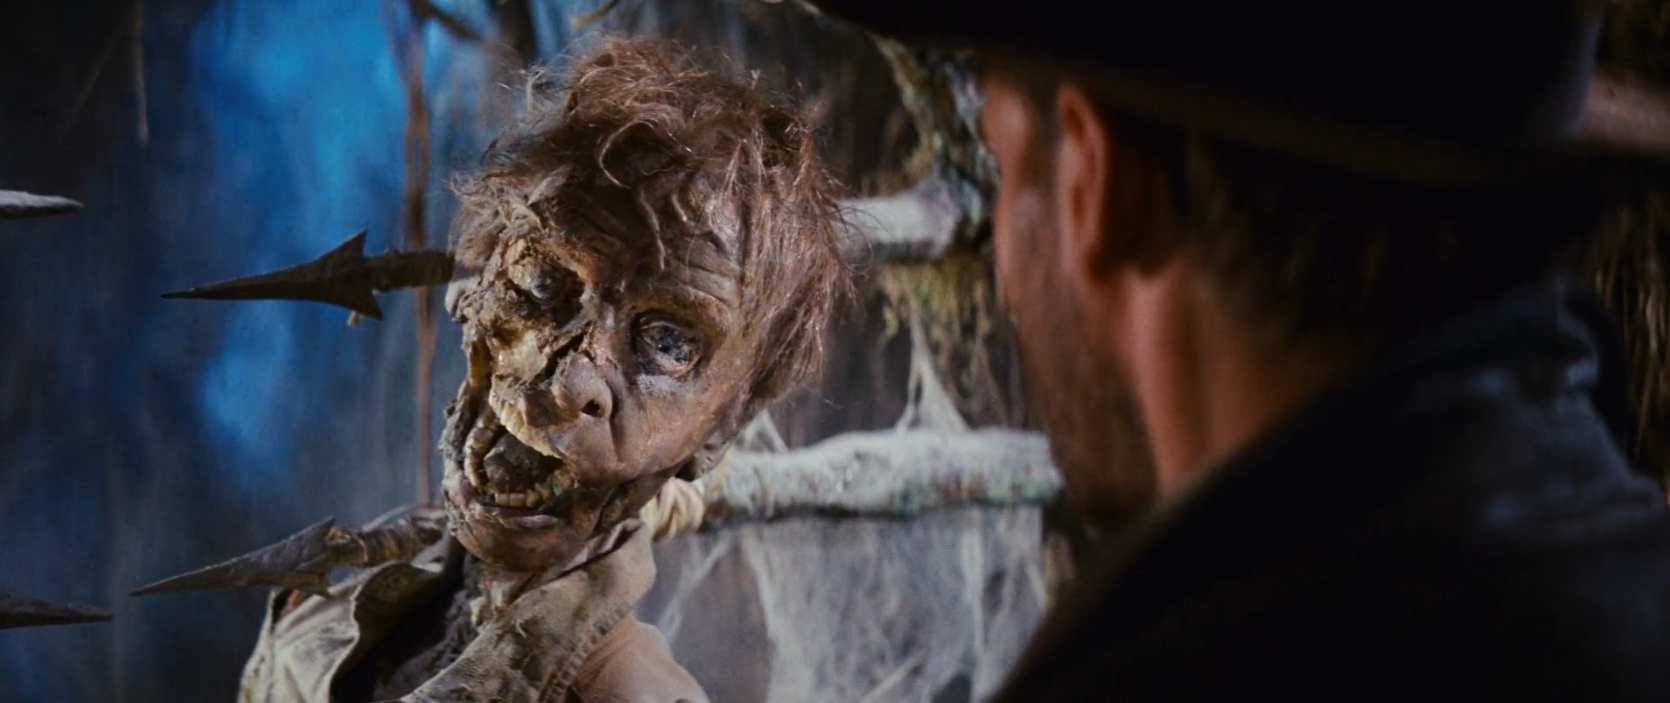 Indiana Jones and the Raiders of the Lost Ark - Corpse